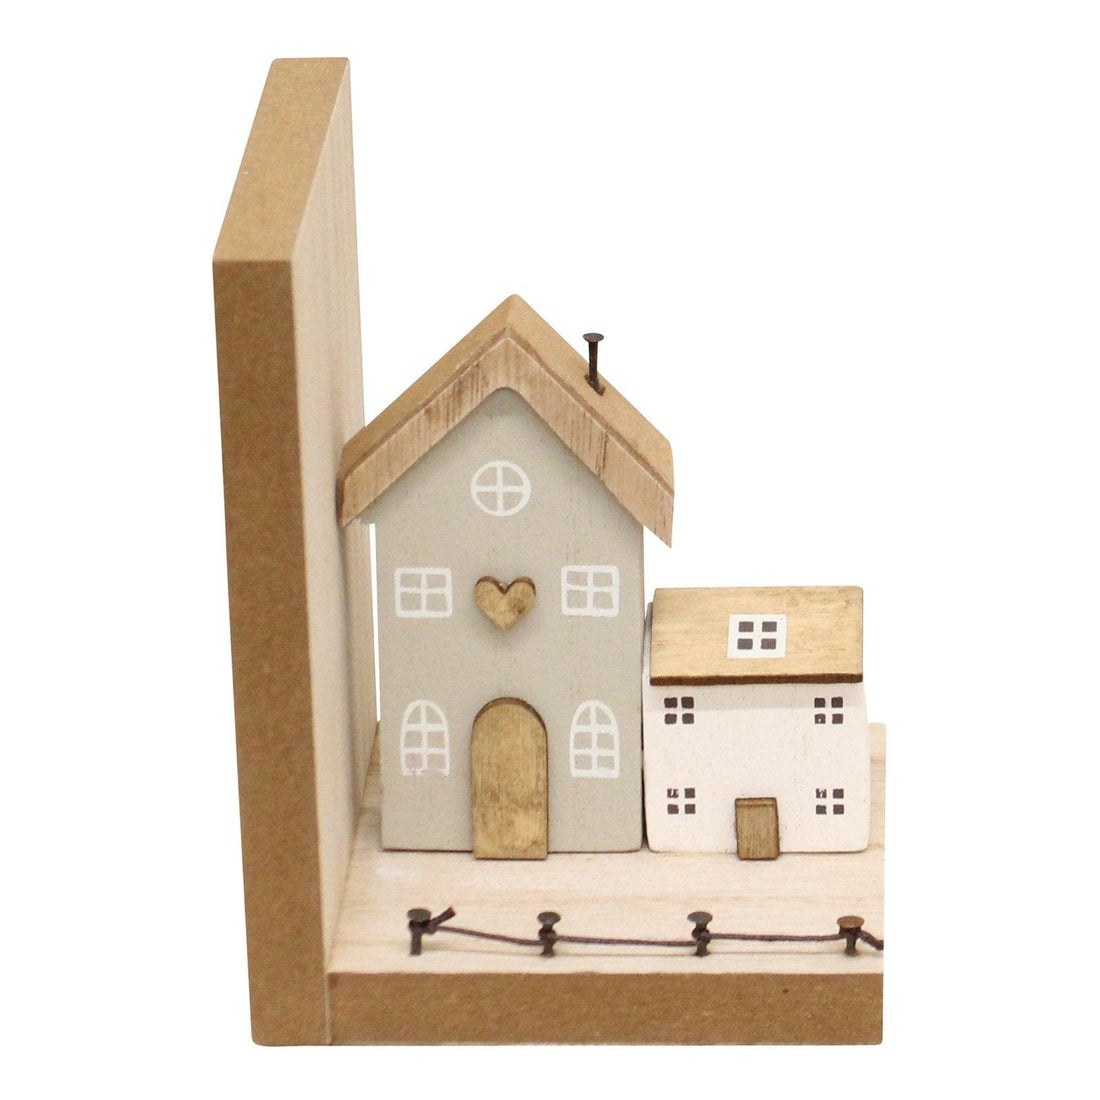 Pair of Bookends, Wooden Houses Design - £22.99 - Bookends 